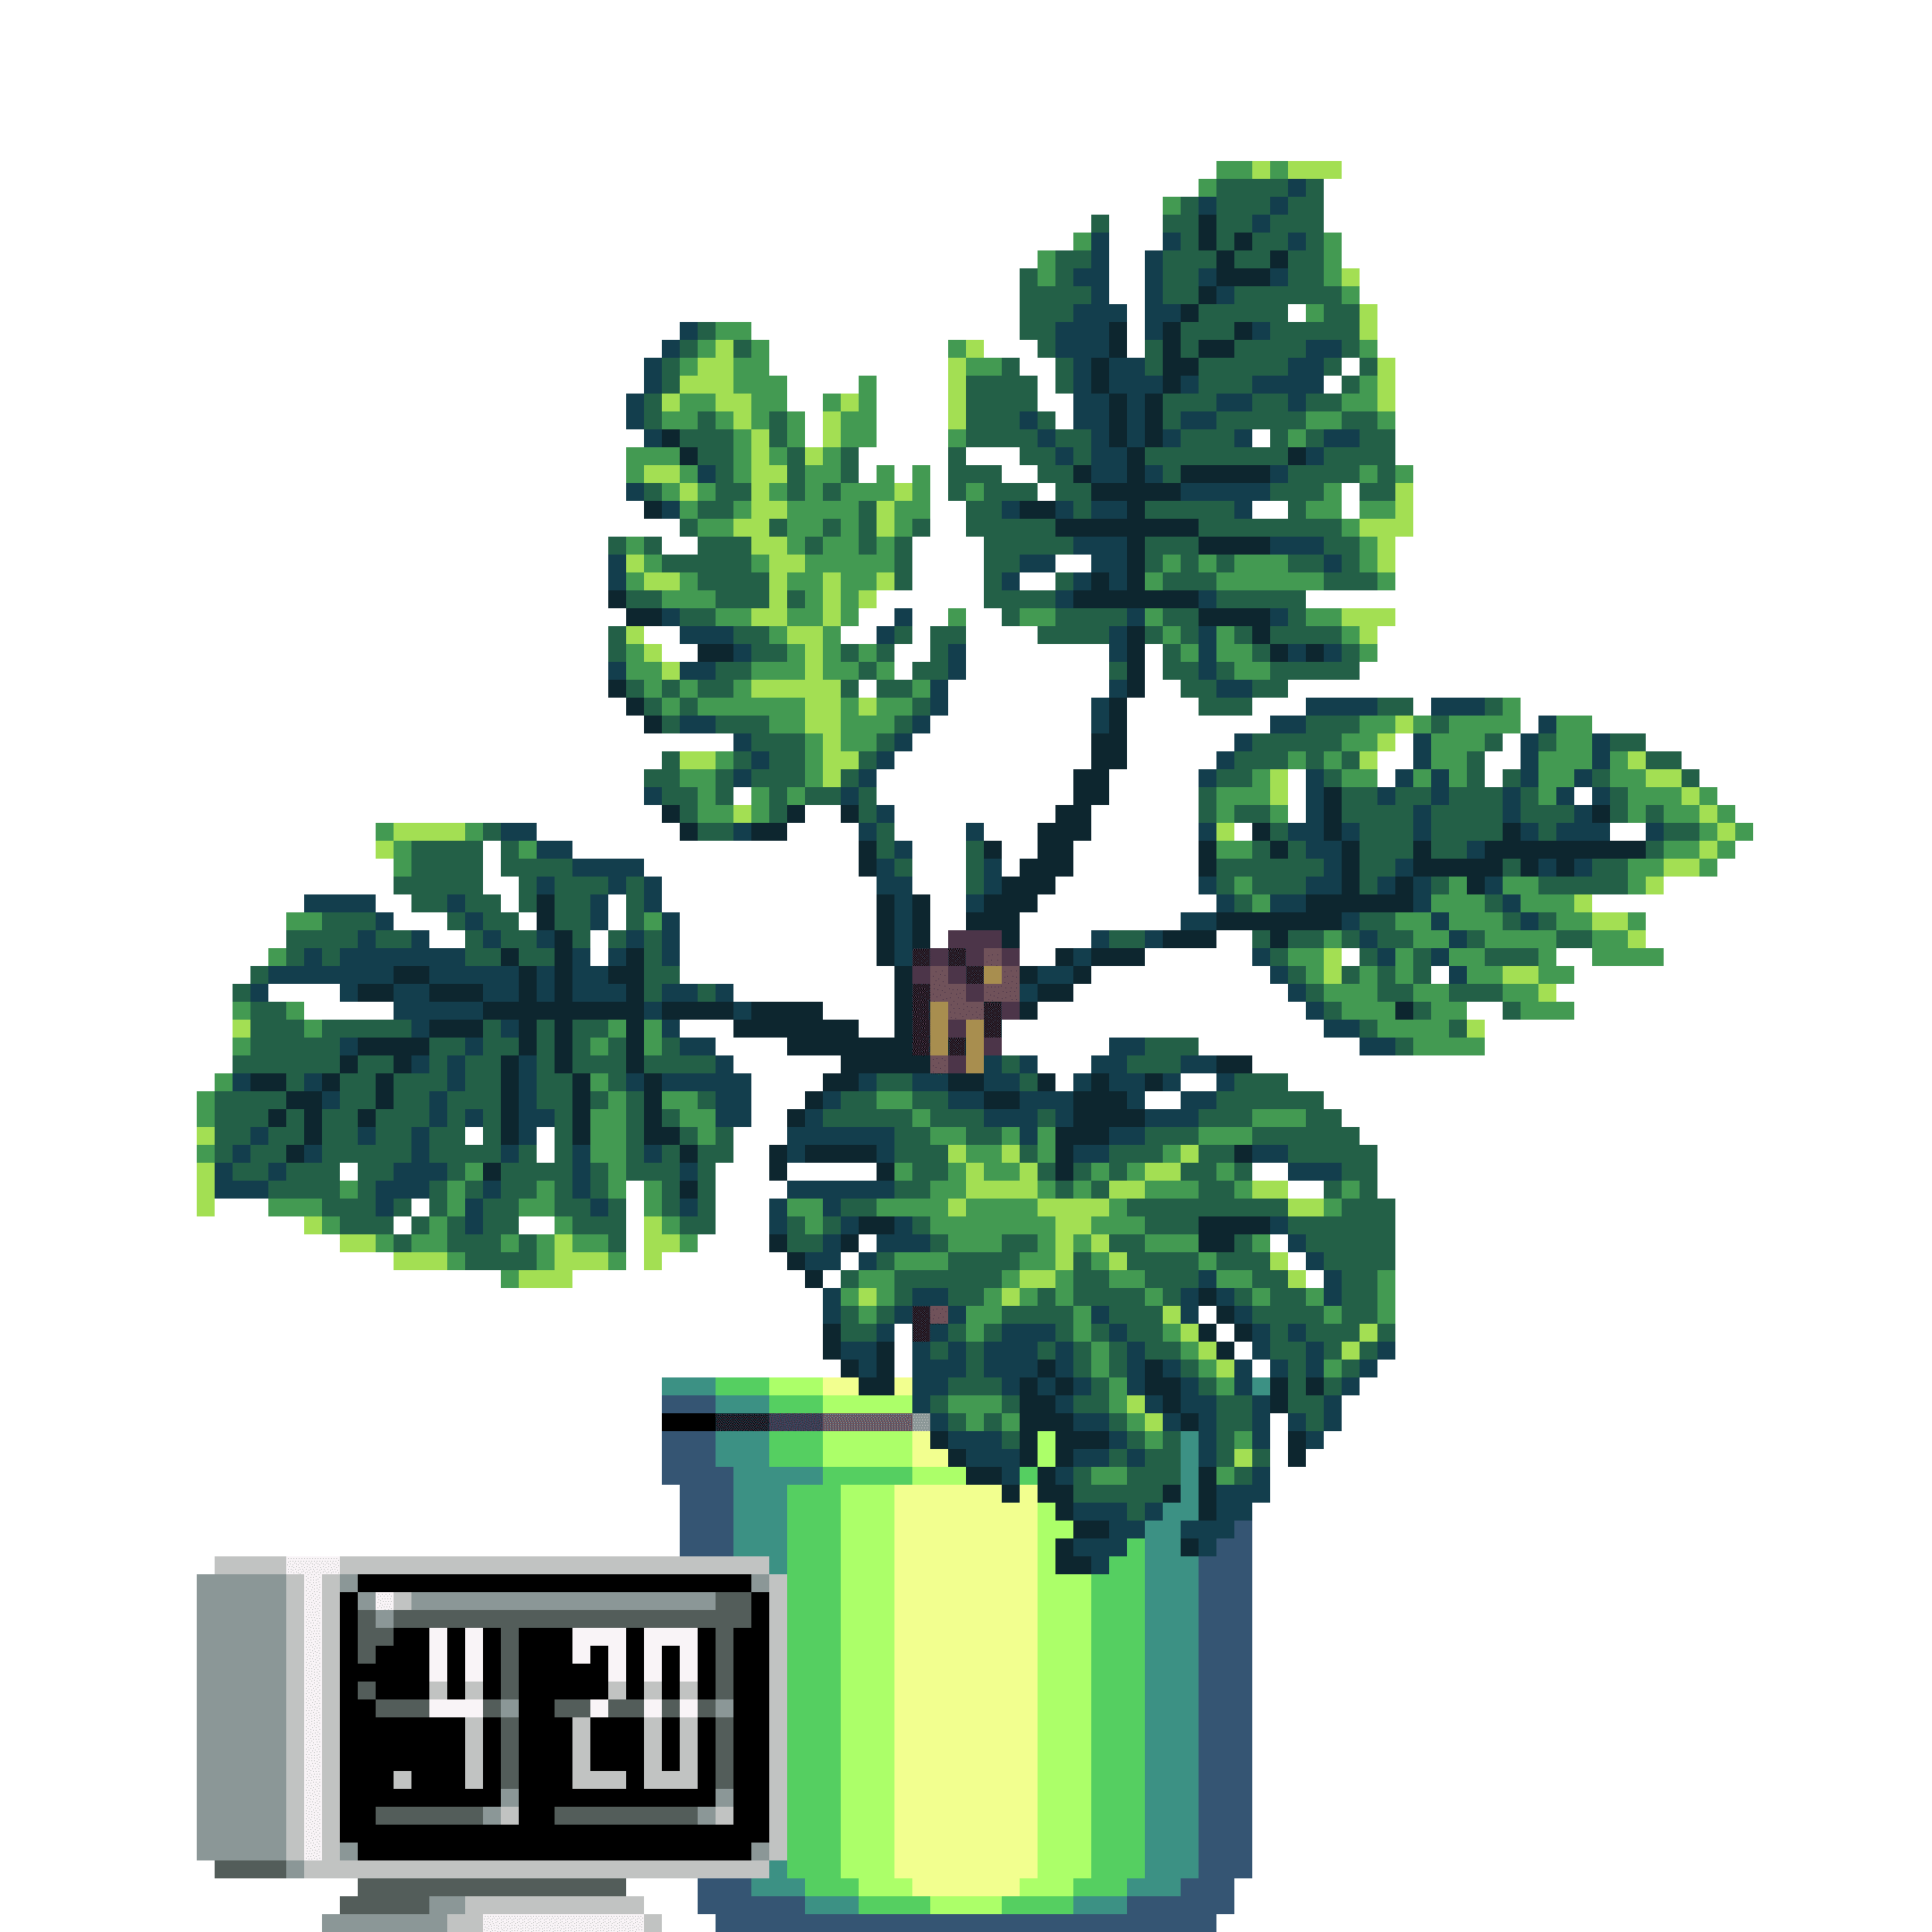 Monstera in Large Pinstripe pot with Flip Clock